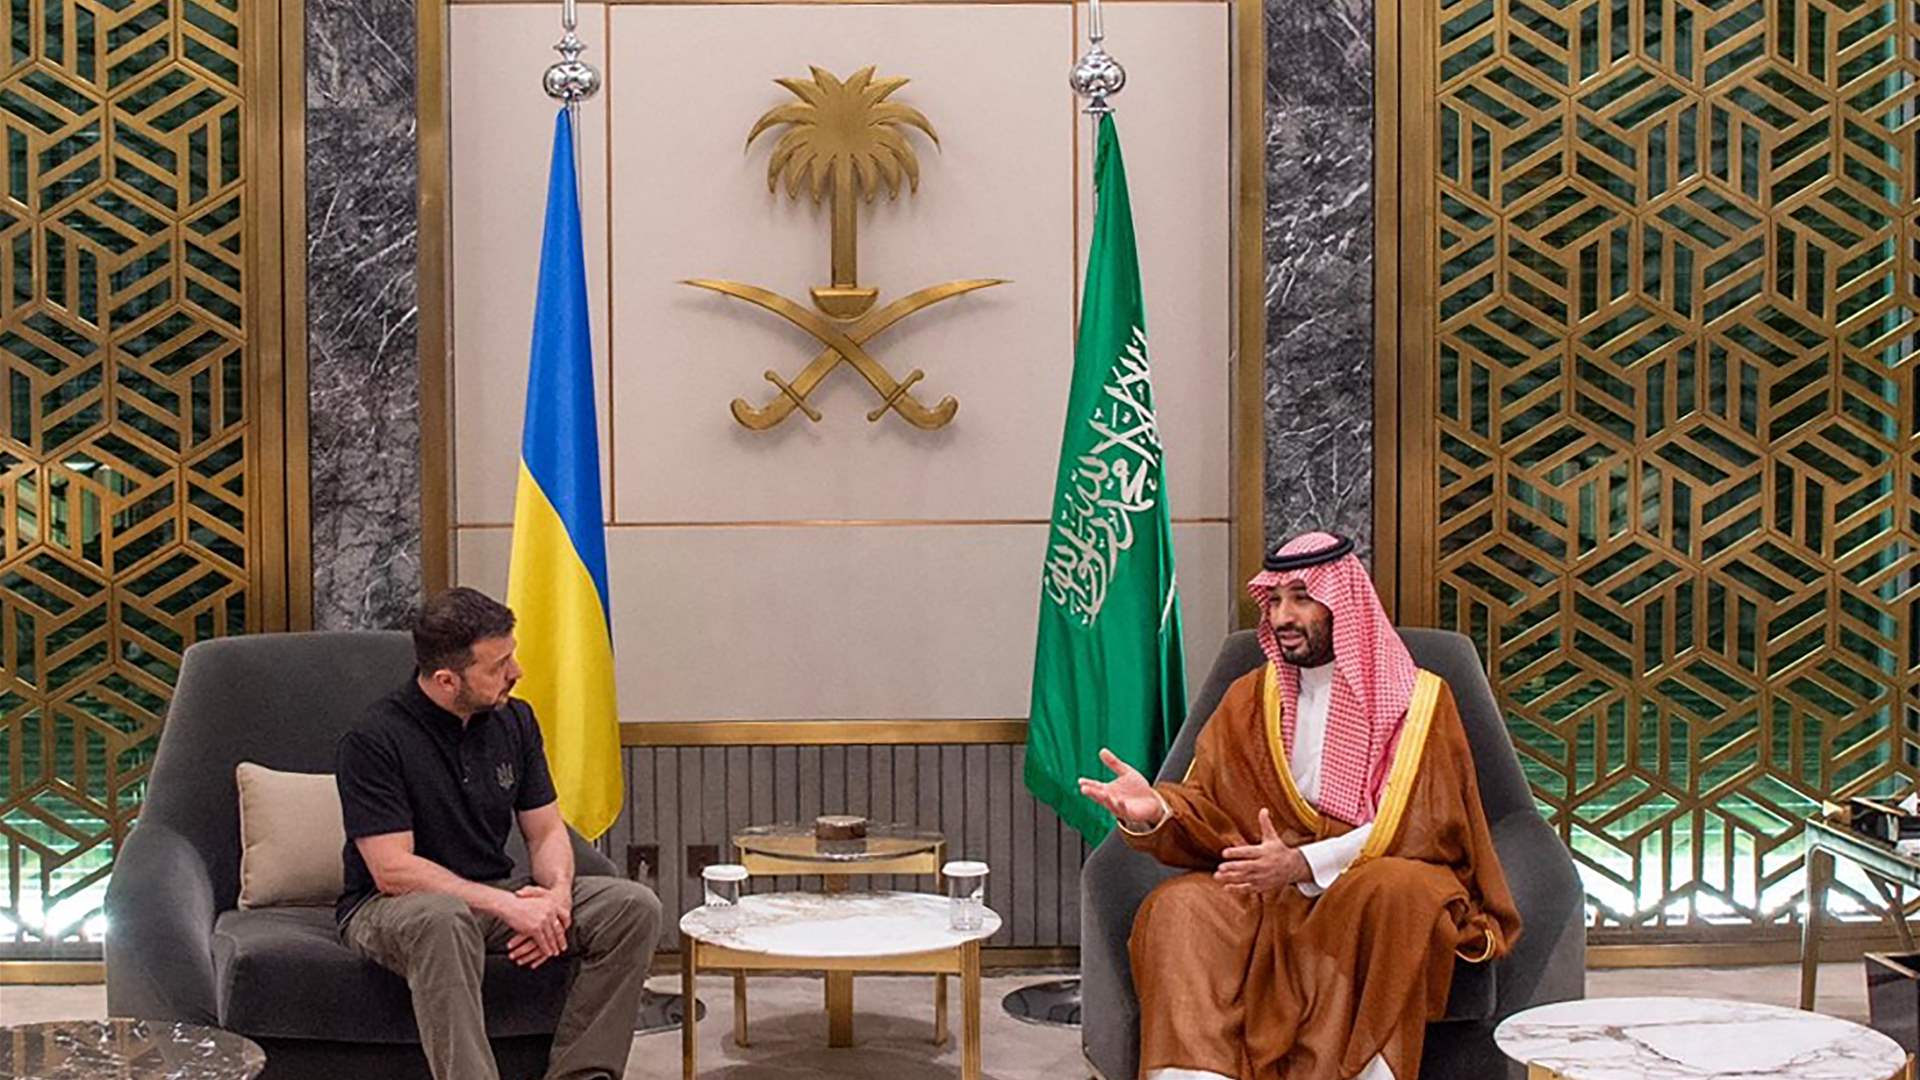 Zelensky reports discussing peace summit preparations with Saudi crown prince